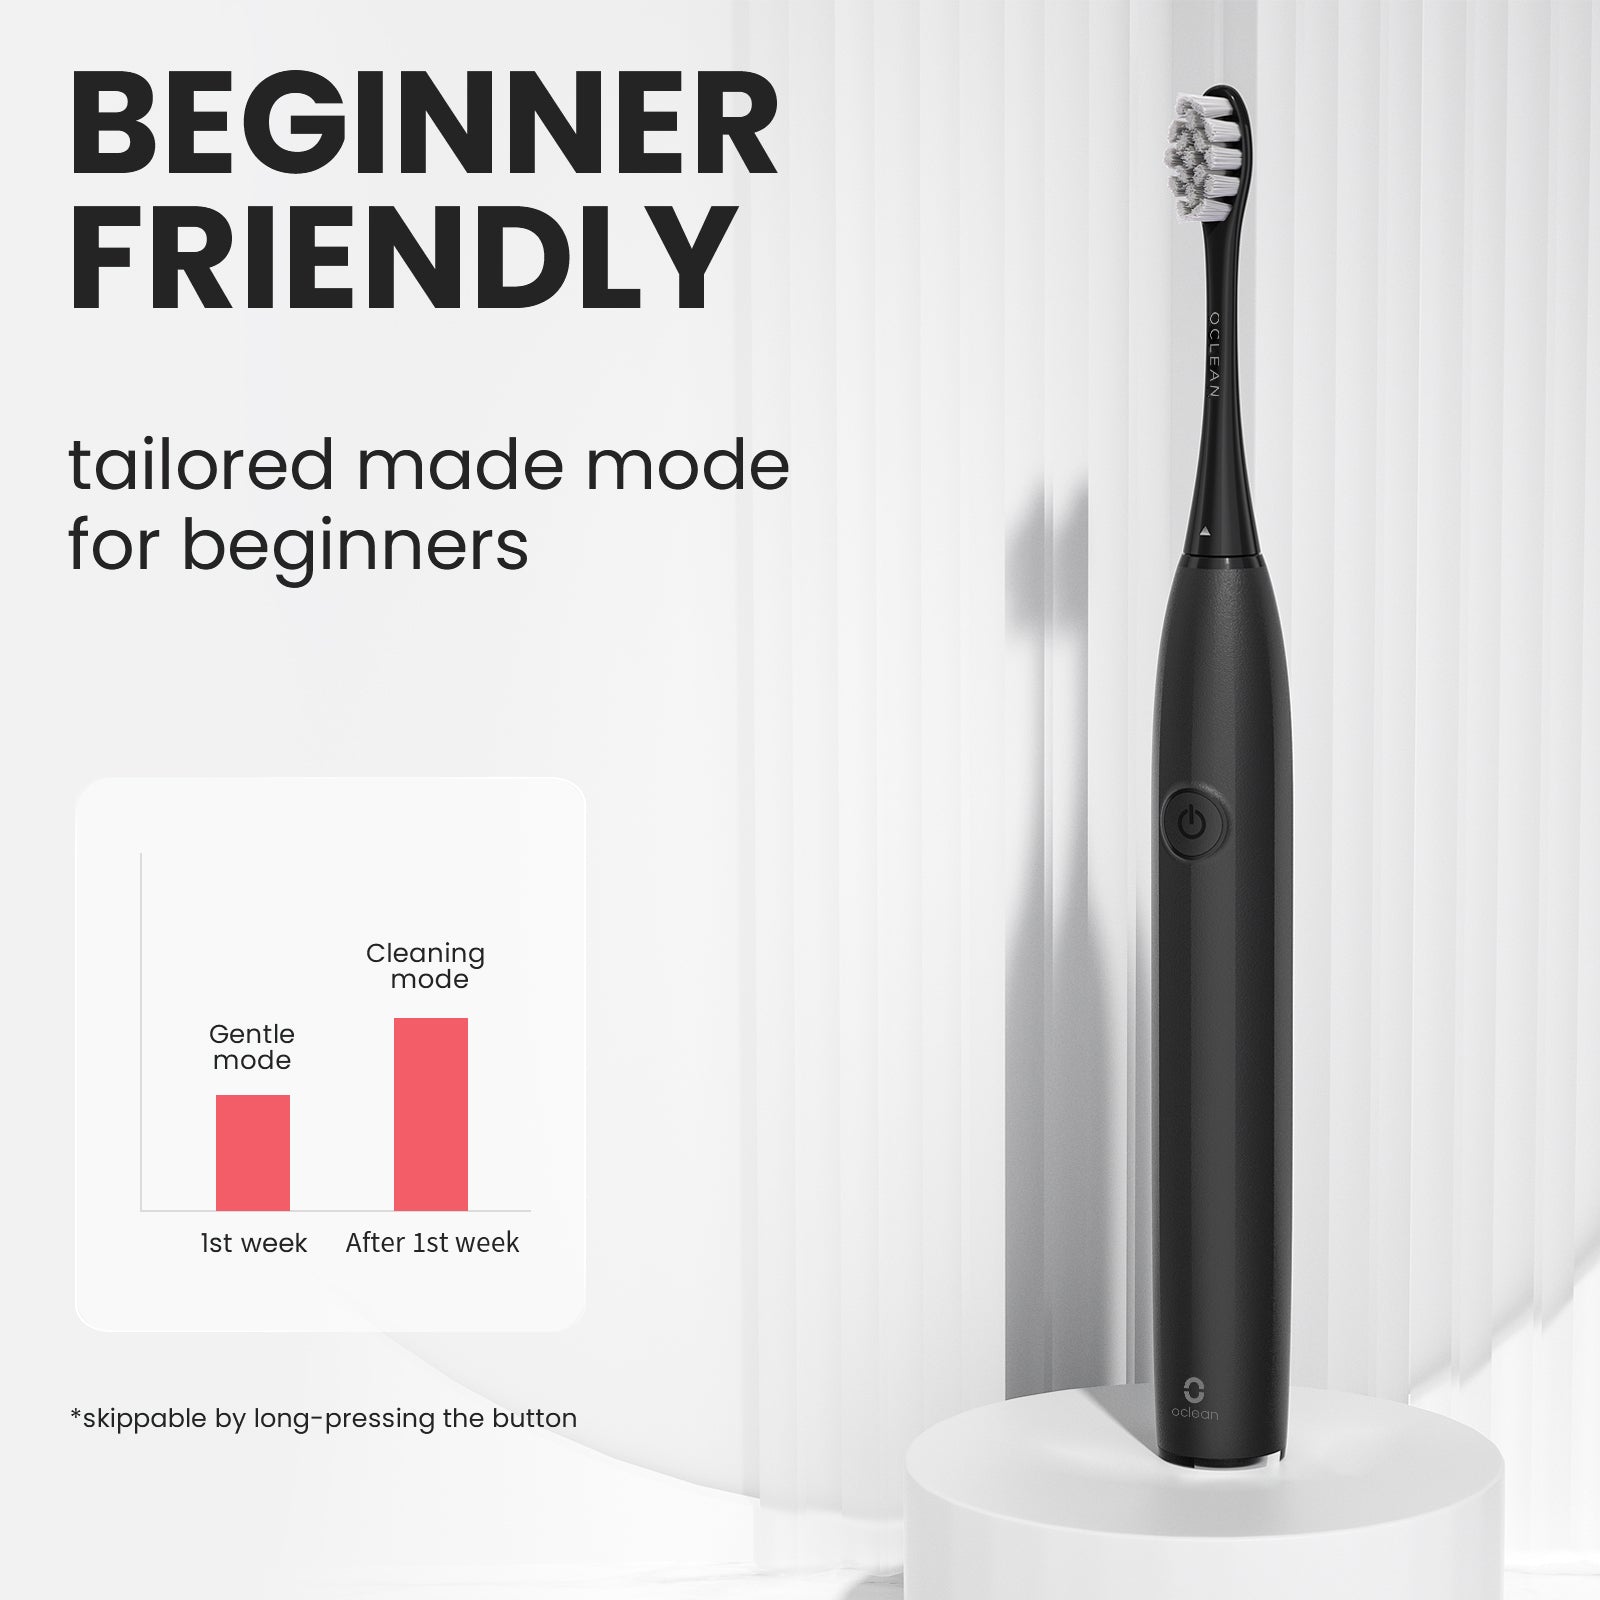 Oclean Endurance Sonic Electric Toothbrush Toothbrushes   Oclean US Store